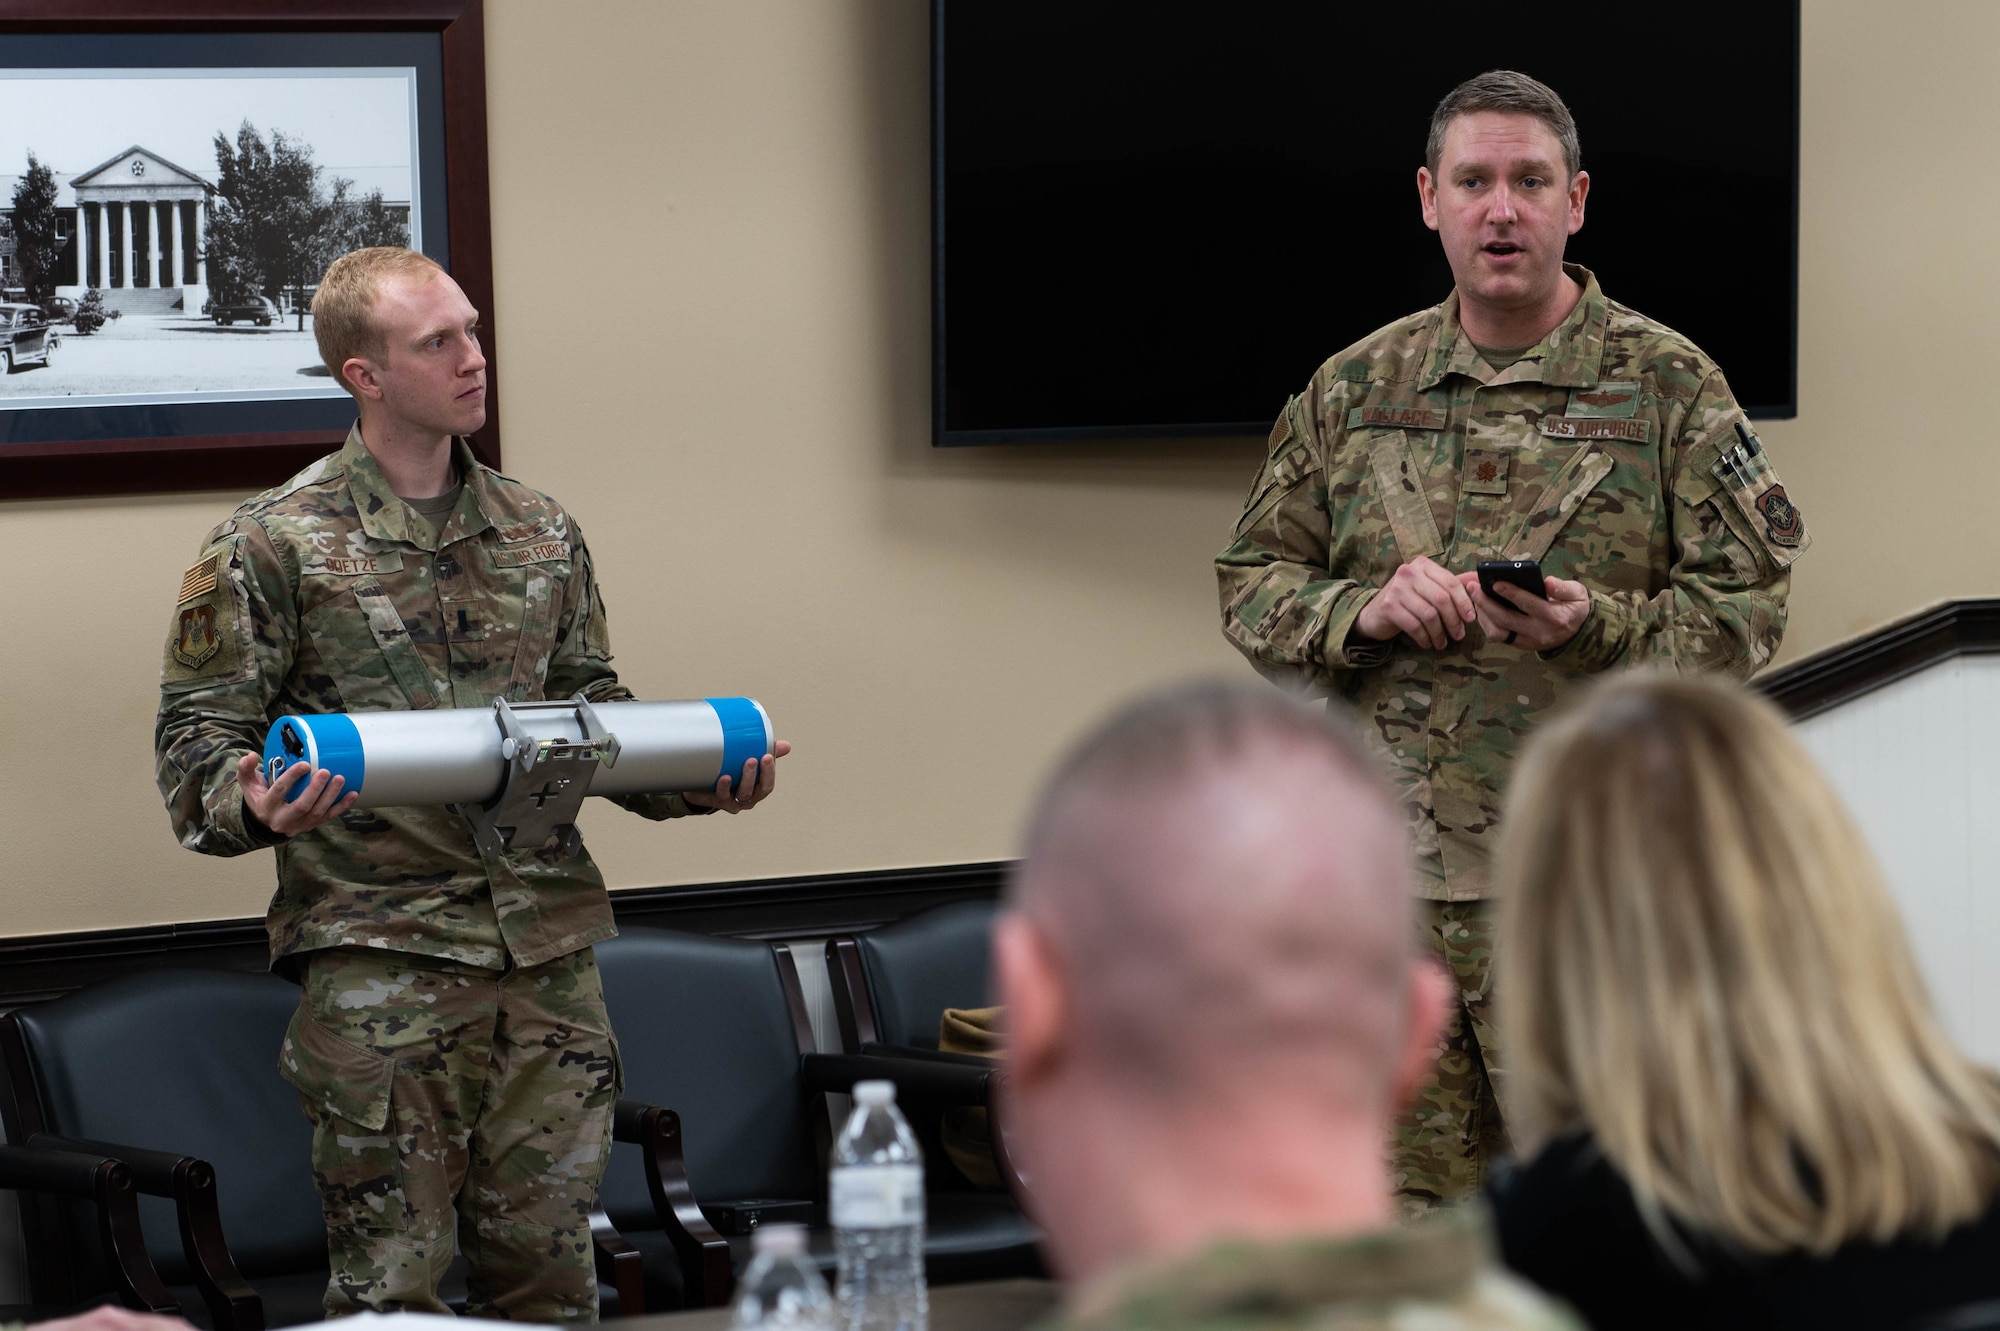 From left, U.S. Air Force 1st Lt. Thomas Goetze, 375th Air Mobility Wing deputy innovation officer, and Maj. Adam Wallace, 375th AMW chief innovation officer, brief 18th Air Force senior leadership about the spark cell, ELEVATE, and it’s potential to help emergency communication at Scott Air Force Base, Illinois, March 9, 2022. Team Elevate is office on base focused on solving airmen issues with innovated solutions. (U.S. Air Force photo by Airman 1st Class Mark Sulaica)